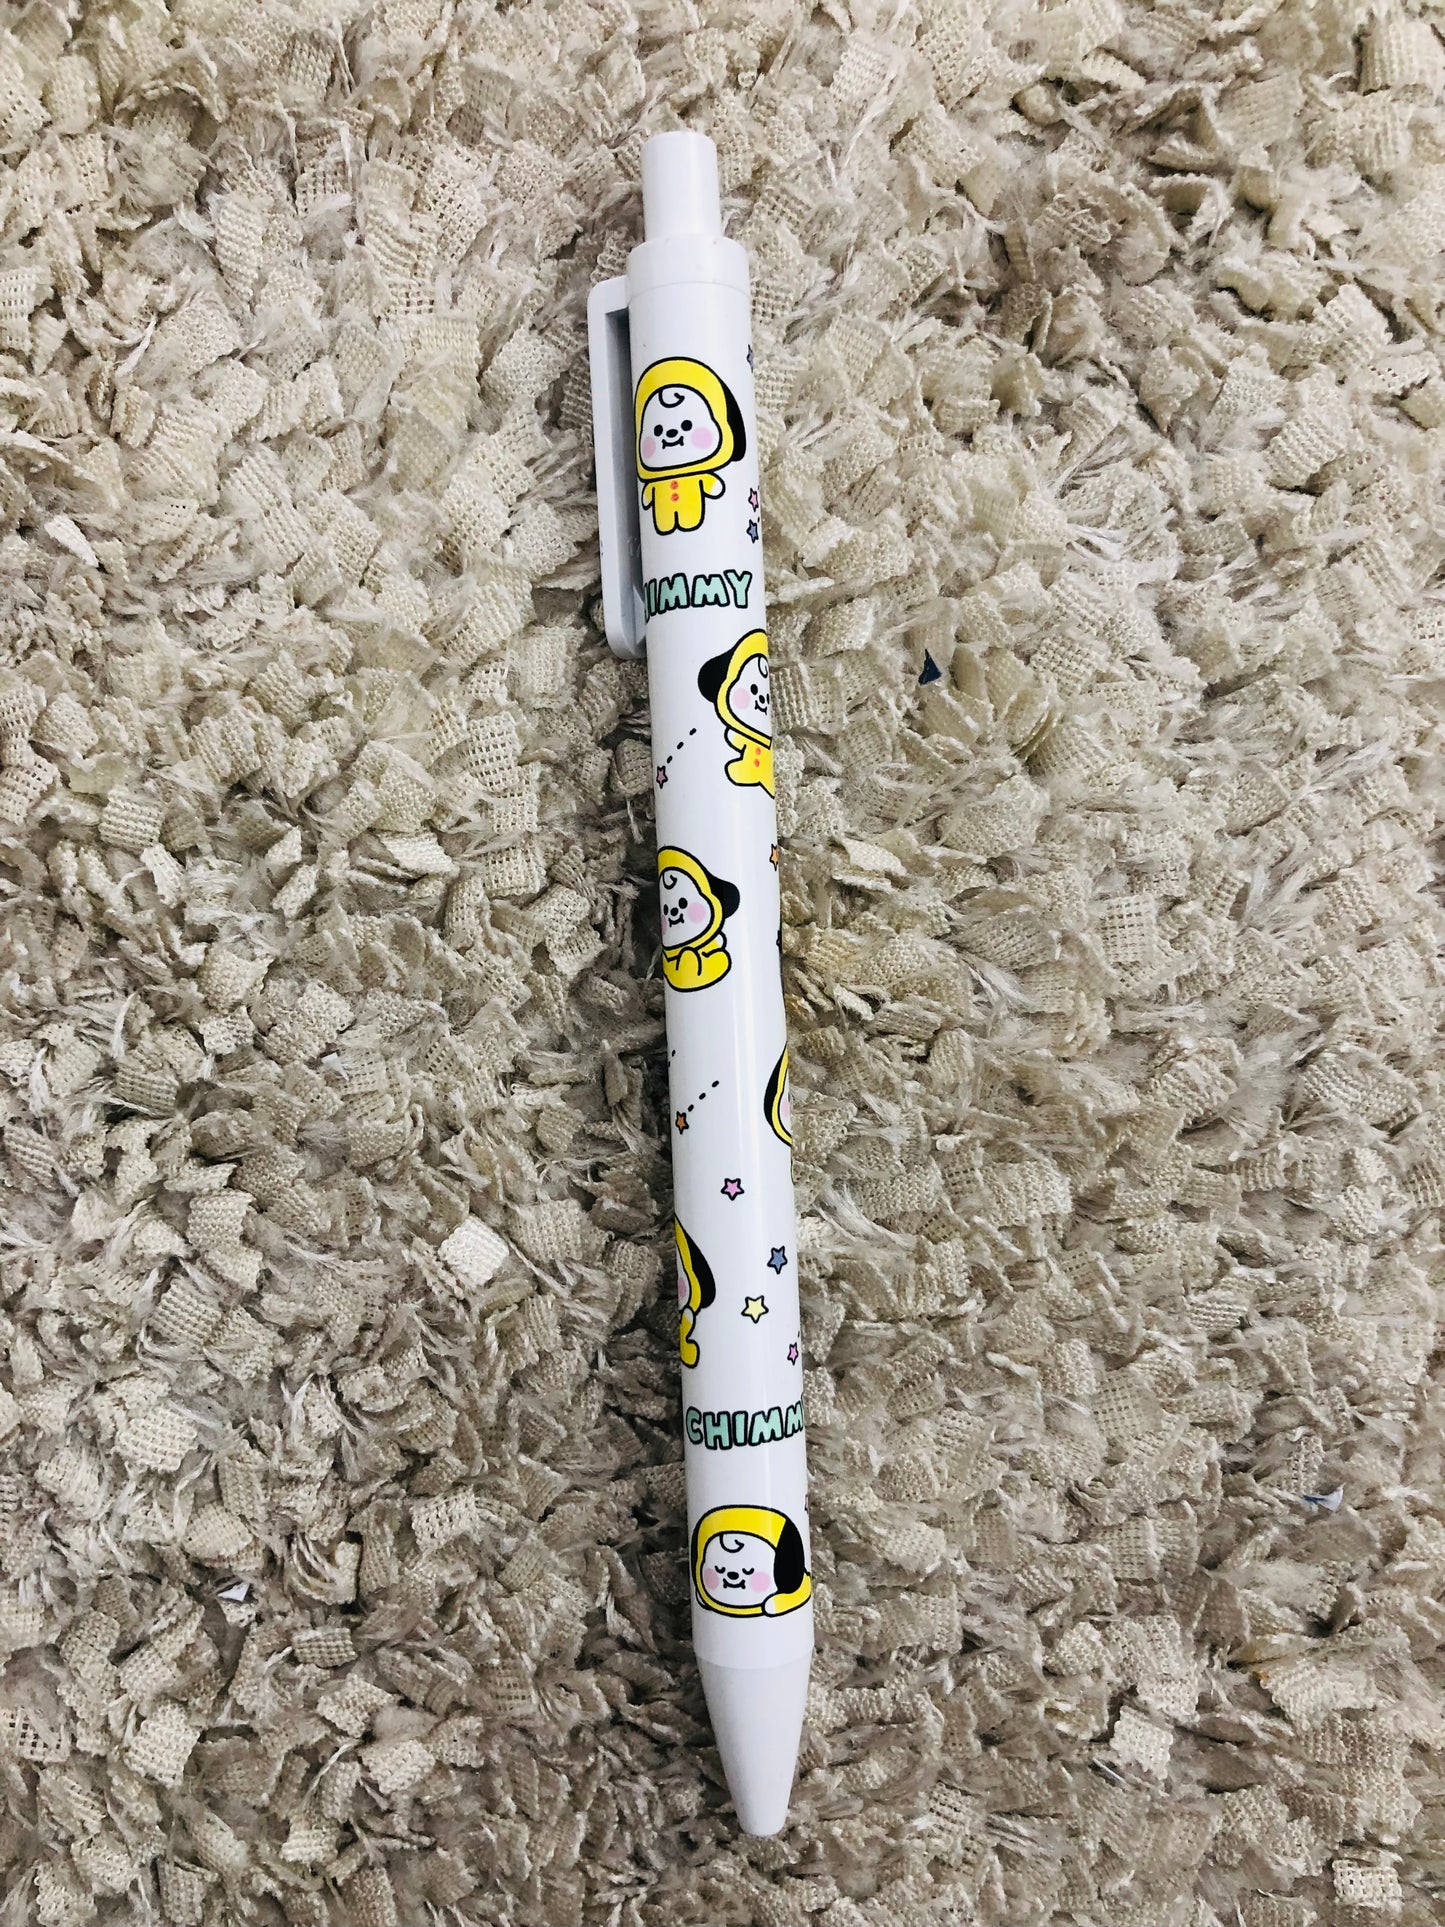 Official Chimmy Pen